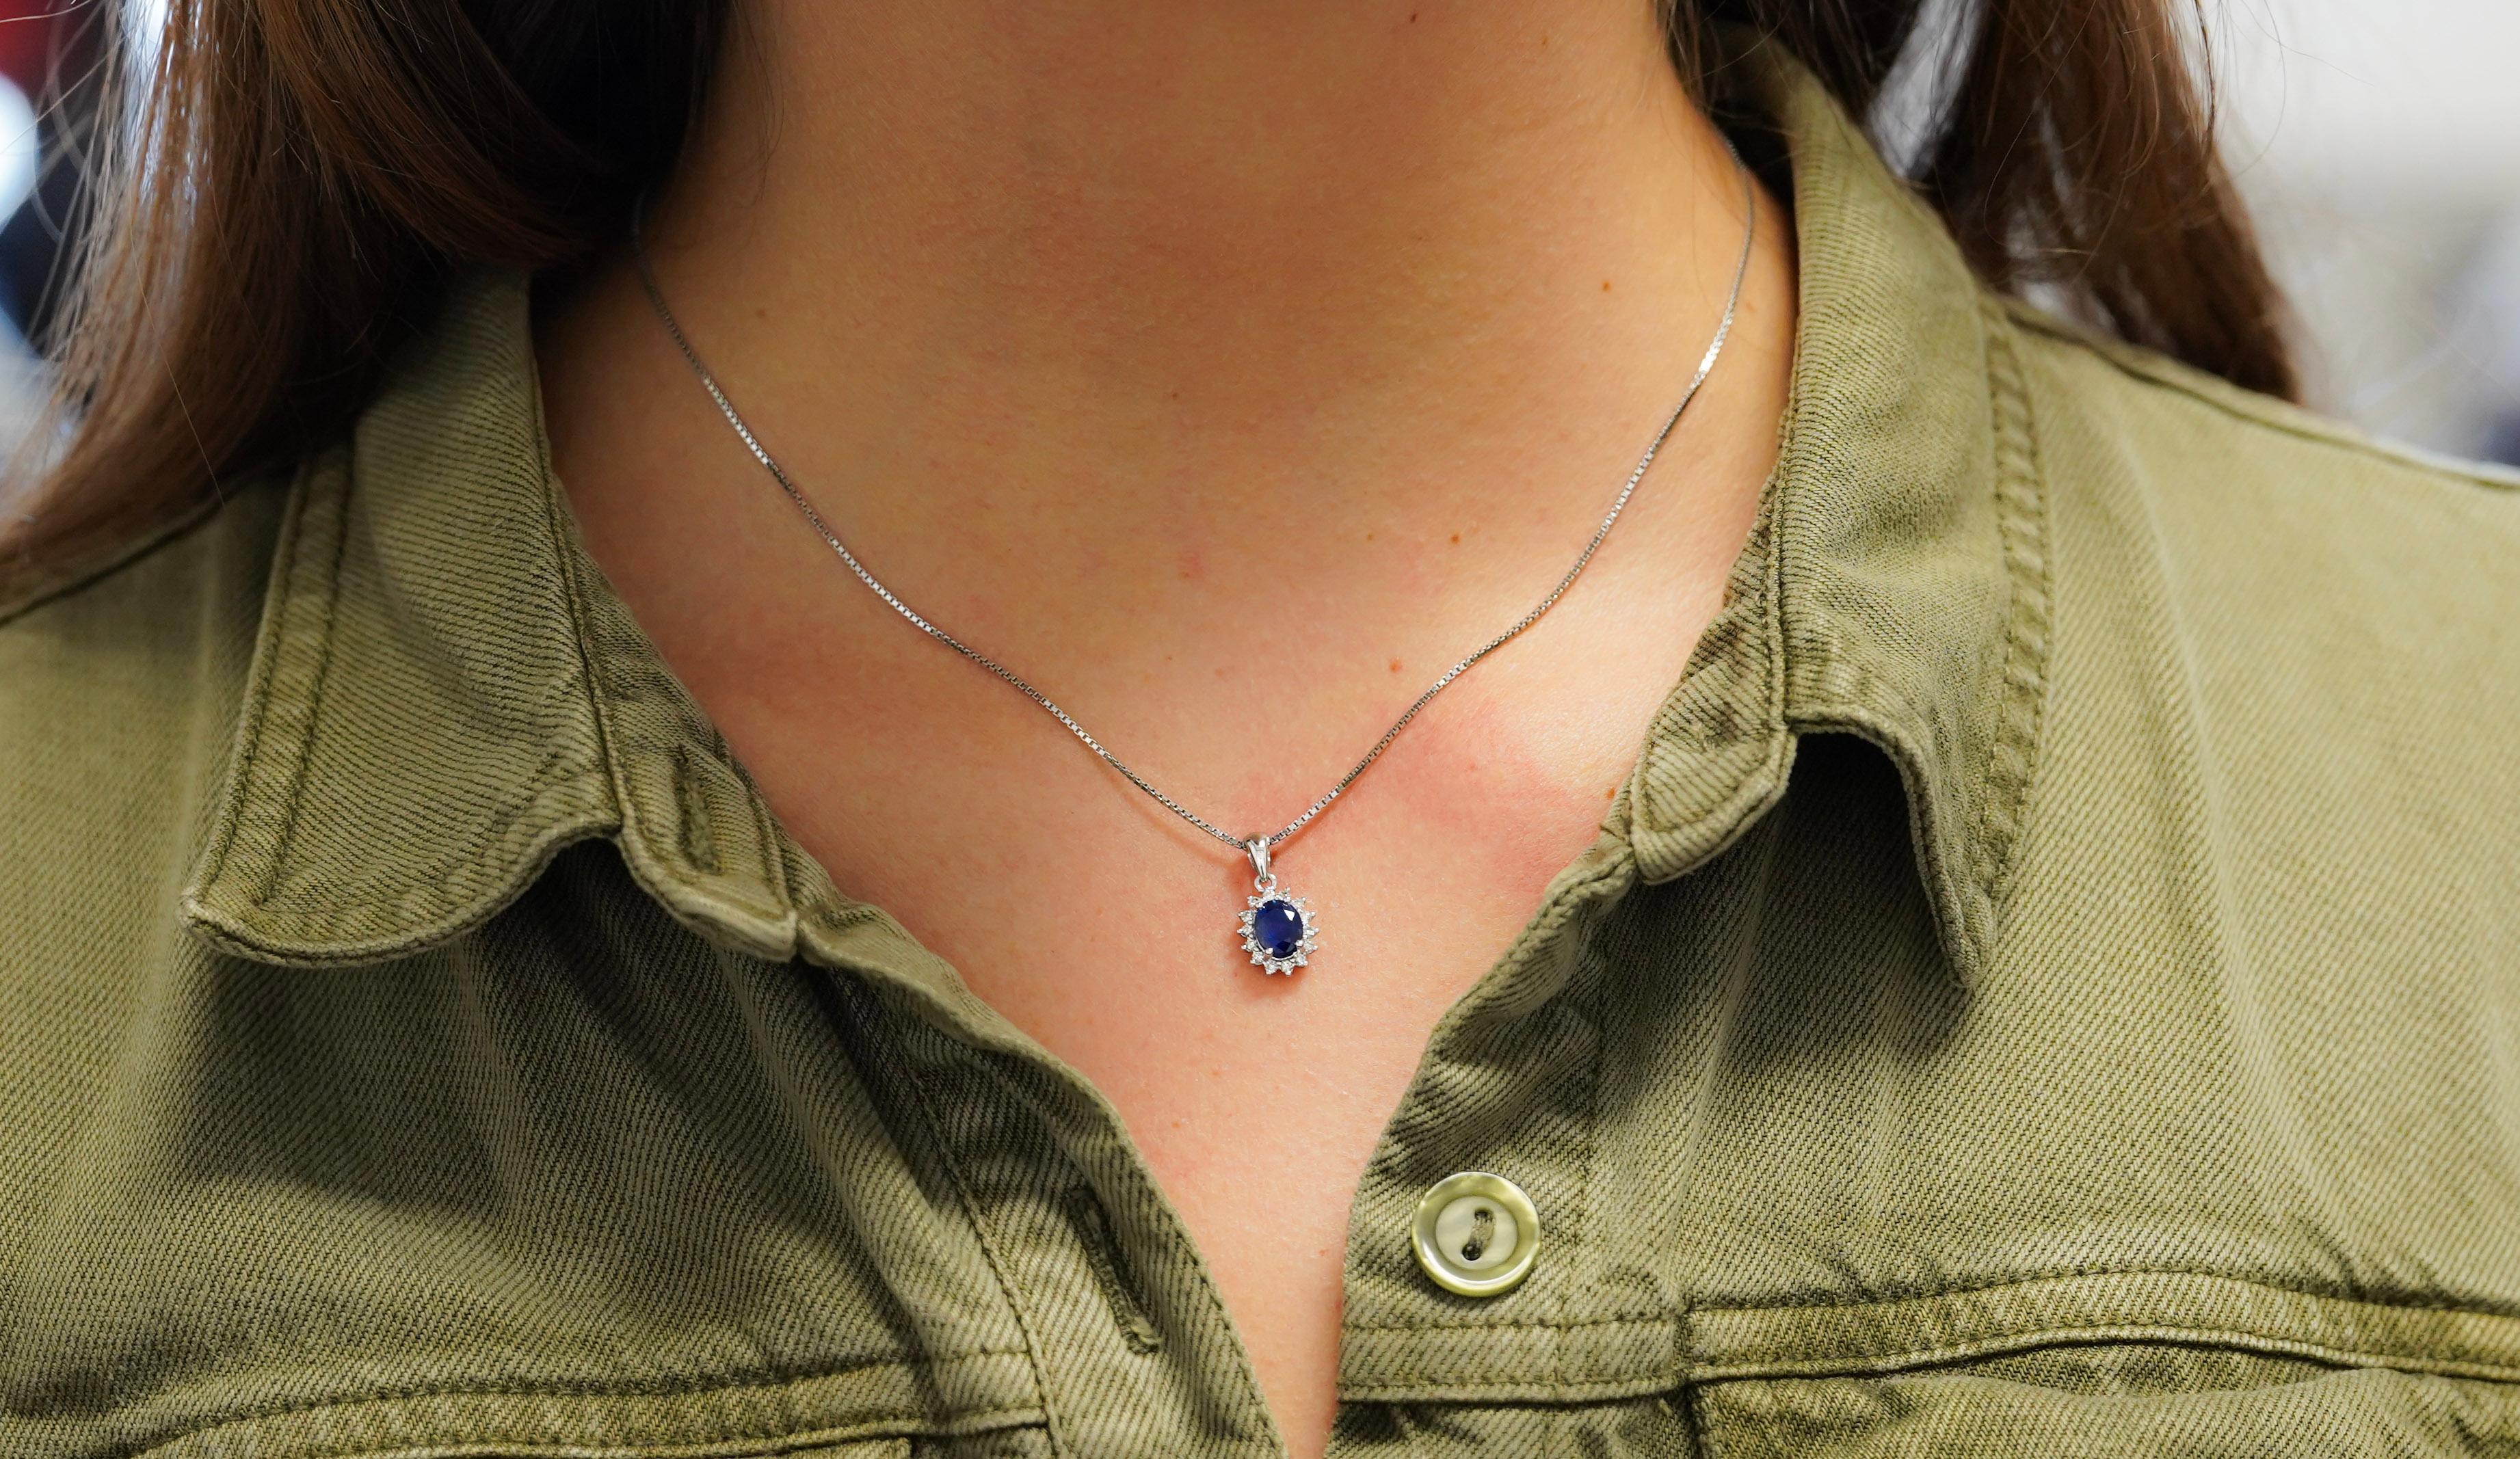 Item Details:
- Type: Drop Pendant Necklace
- Metal: 18K White Gold
- Weight: 1.05 Grams (pendant only)
- Setting: Prong, Halo
______________________________

Center Stone Details:
- Type: Natural Sapphire
- Carat: 1.20
- Cut: Oval
- Color: Blue
-